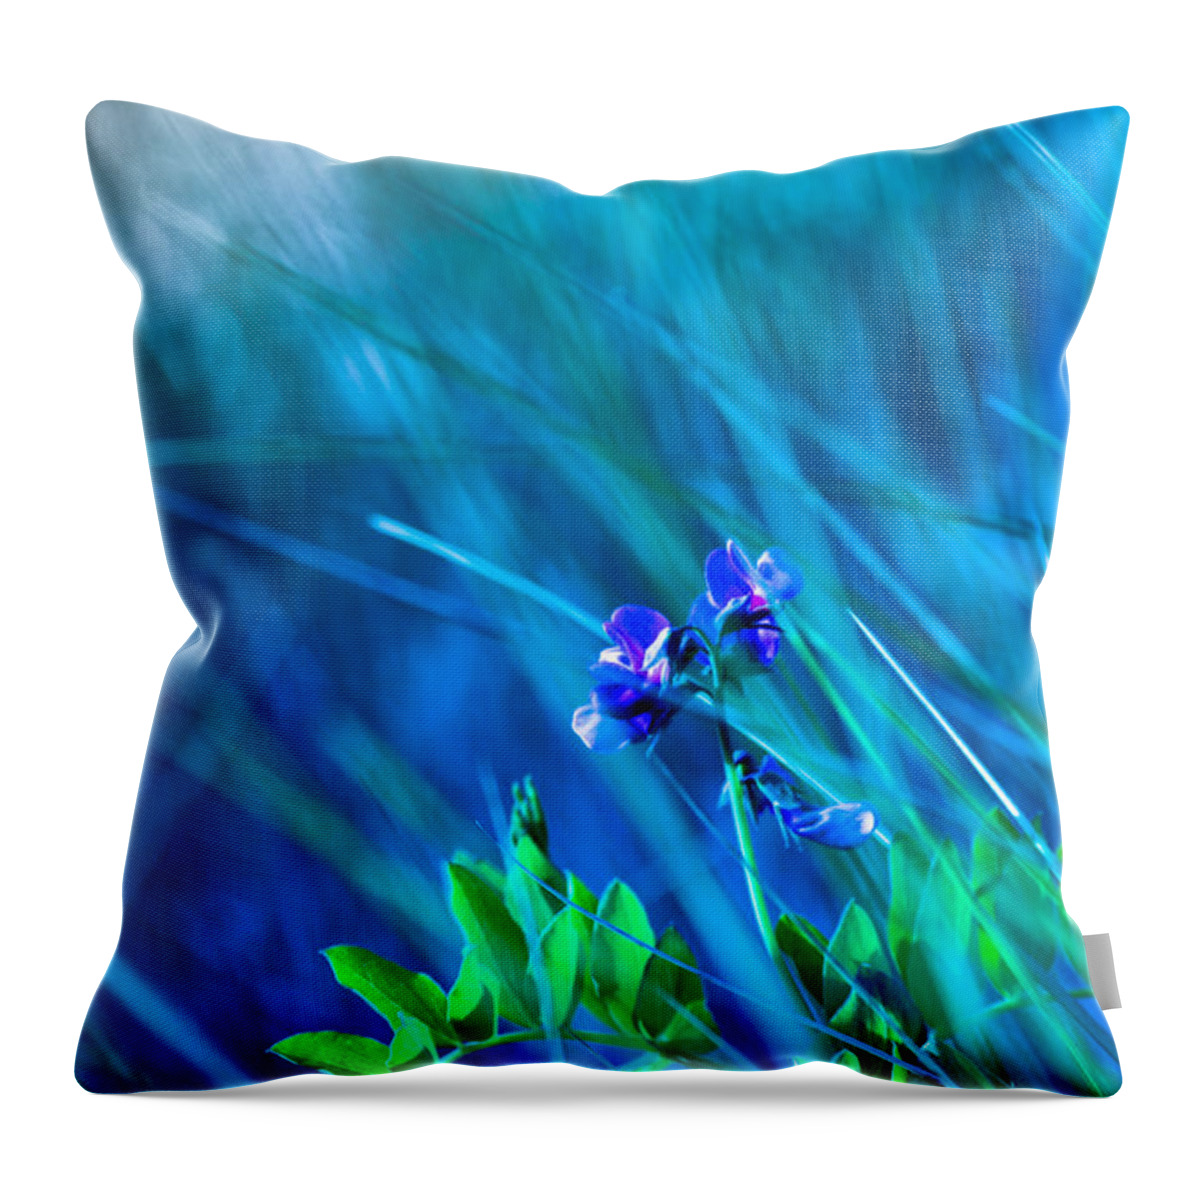 Purple Throw Pillow featuring the photograph Vetch In Blue by Adria Trail